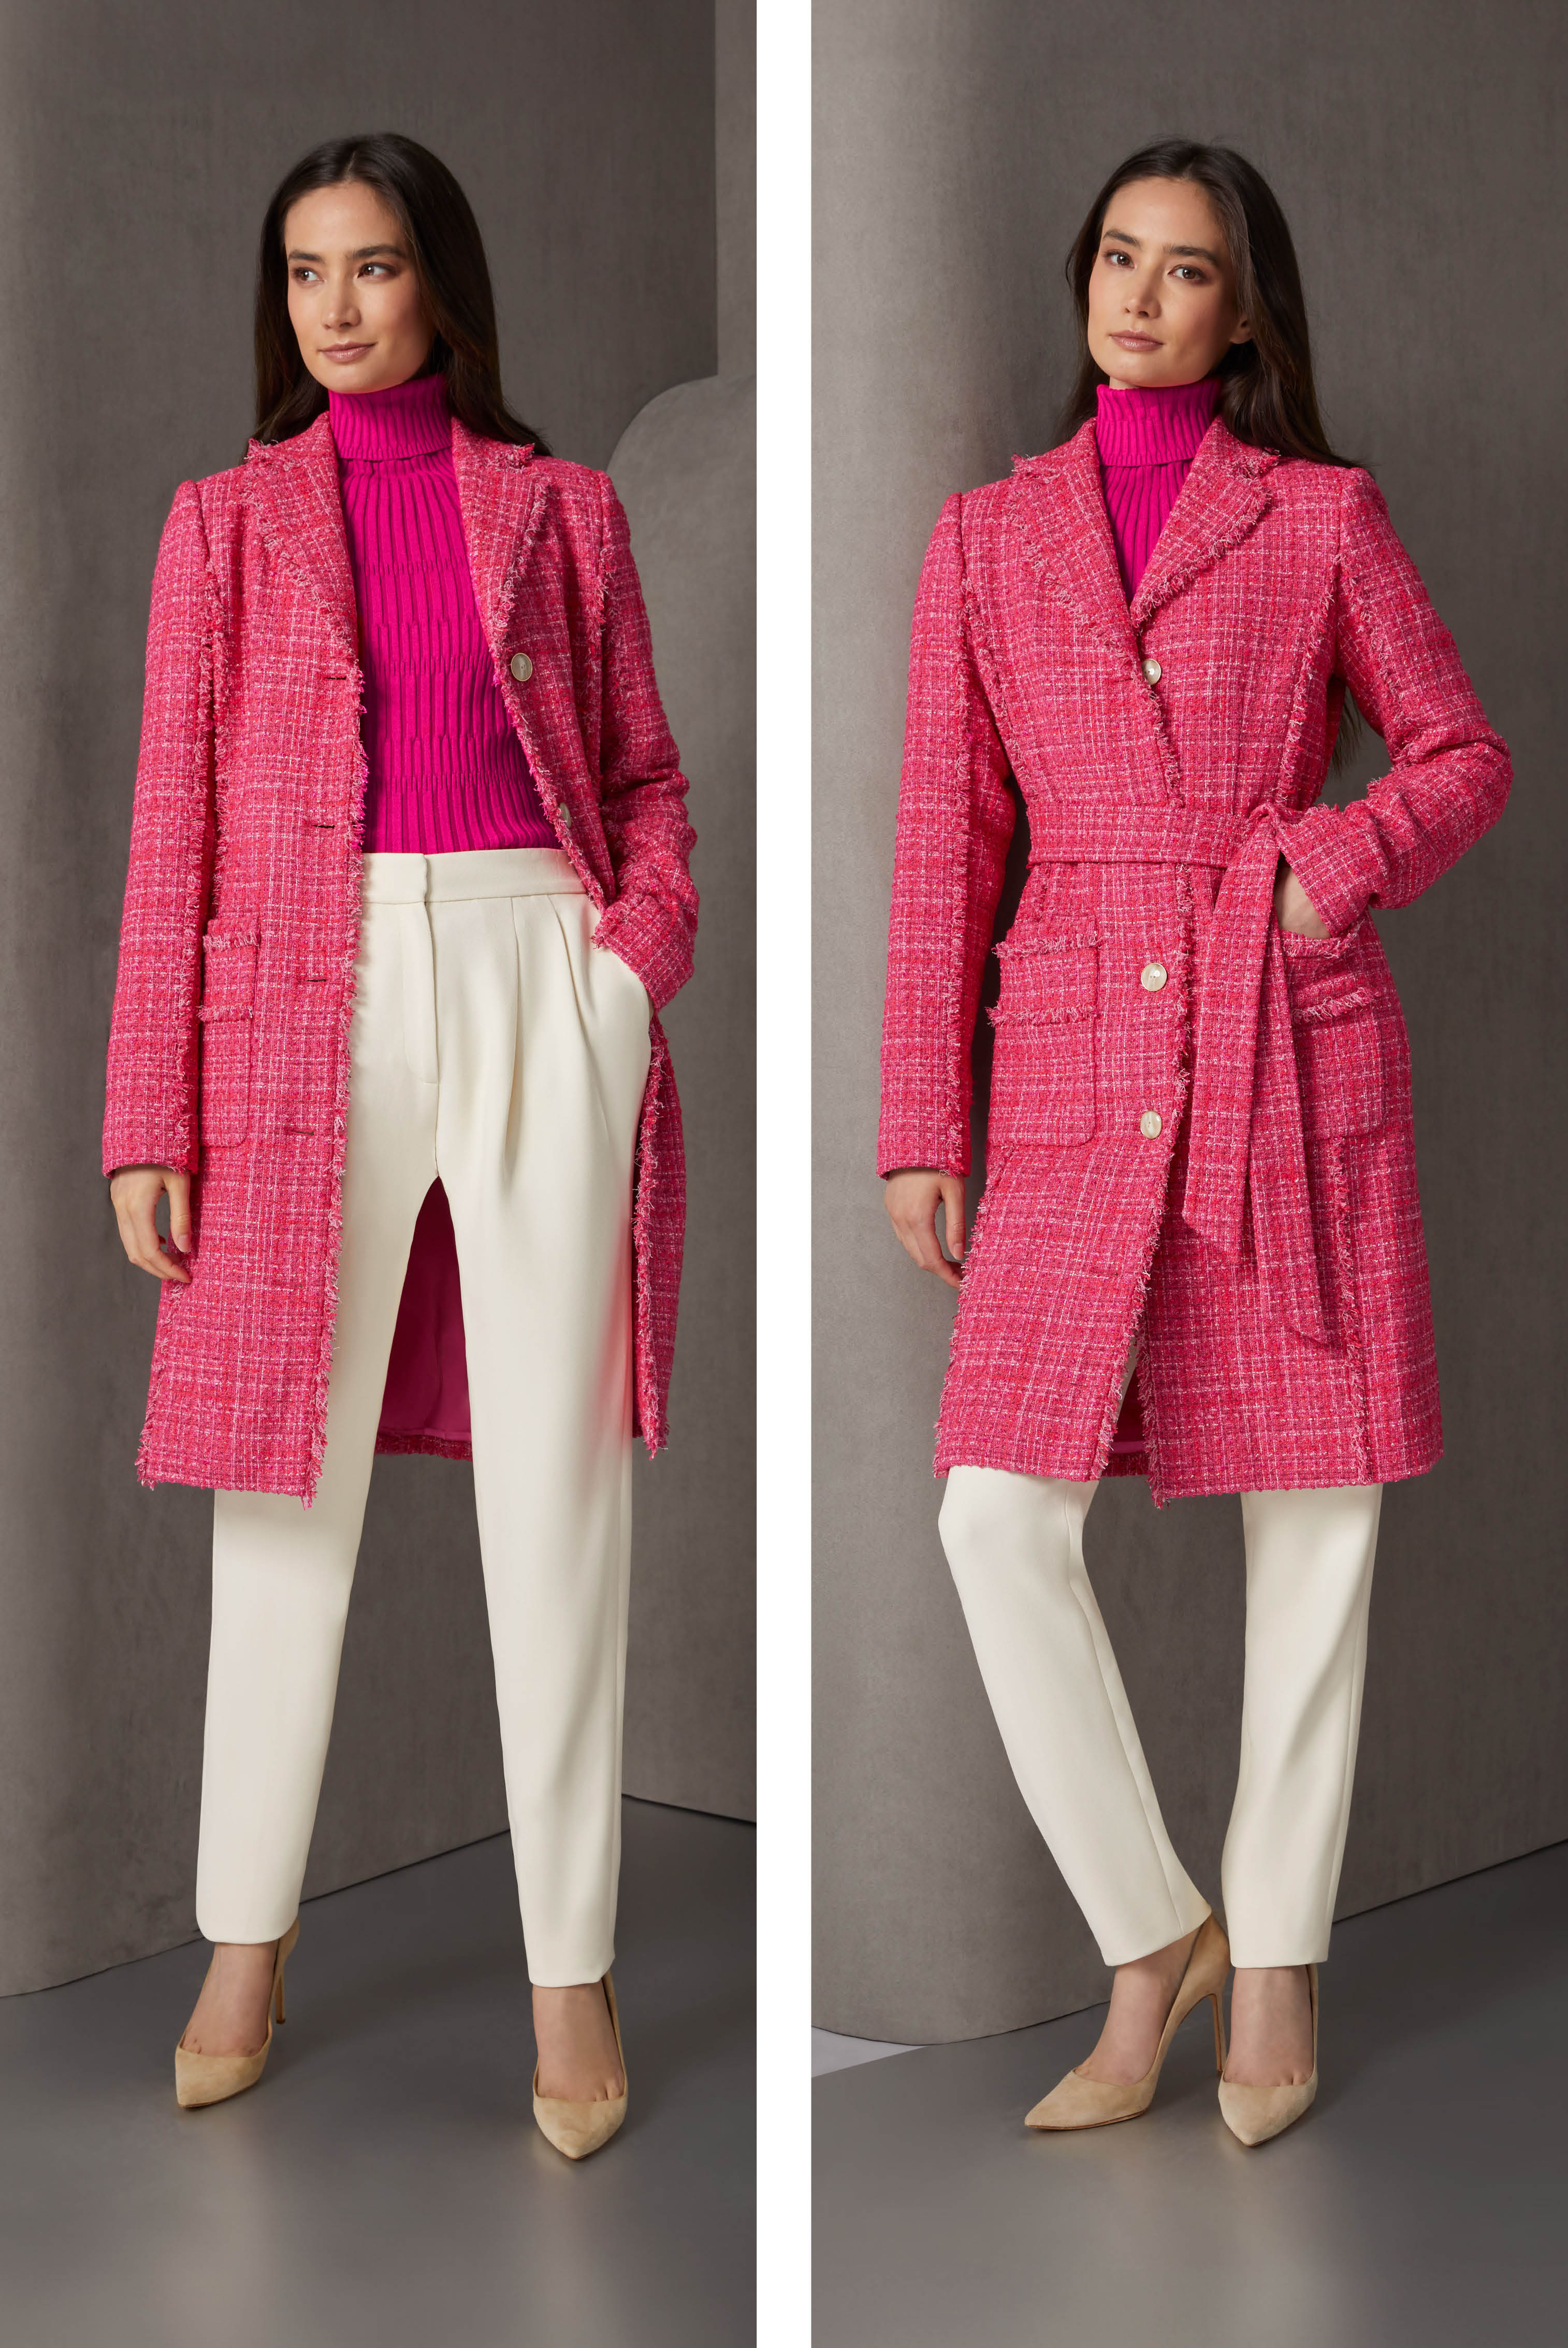 This belted Italian bouclé tweed coat with allover self-fringe trim is woven in five colors, three of which are pink. The silky matching pink turtleneck is knit in a radiating piano key rib for opulent contrast texture.